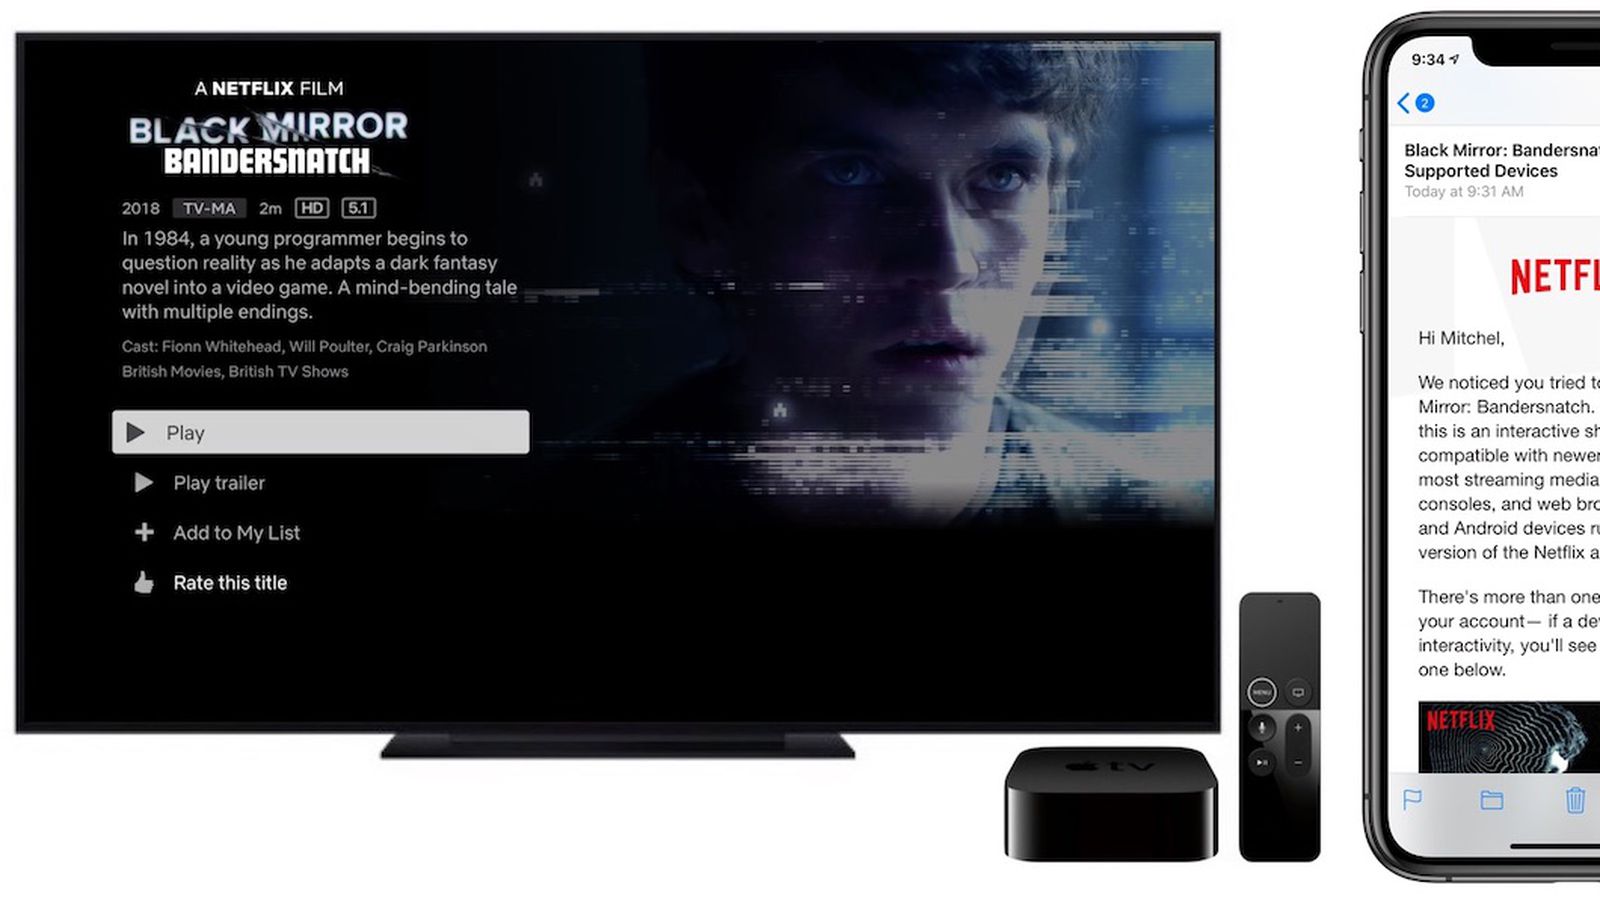 Stirre diameter forsinke Netflix 'Doubling Down' on Interactive TV Shows, Unclear if Any Will Be  Available on Apple TV - MacRumors